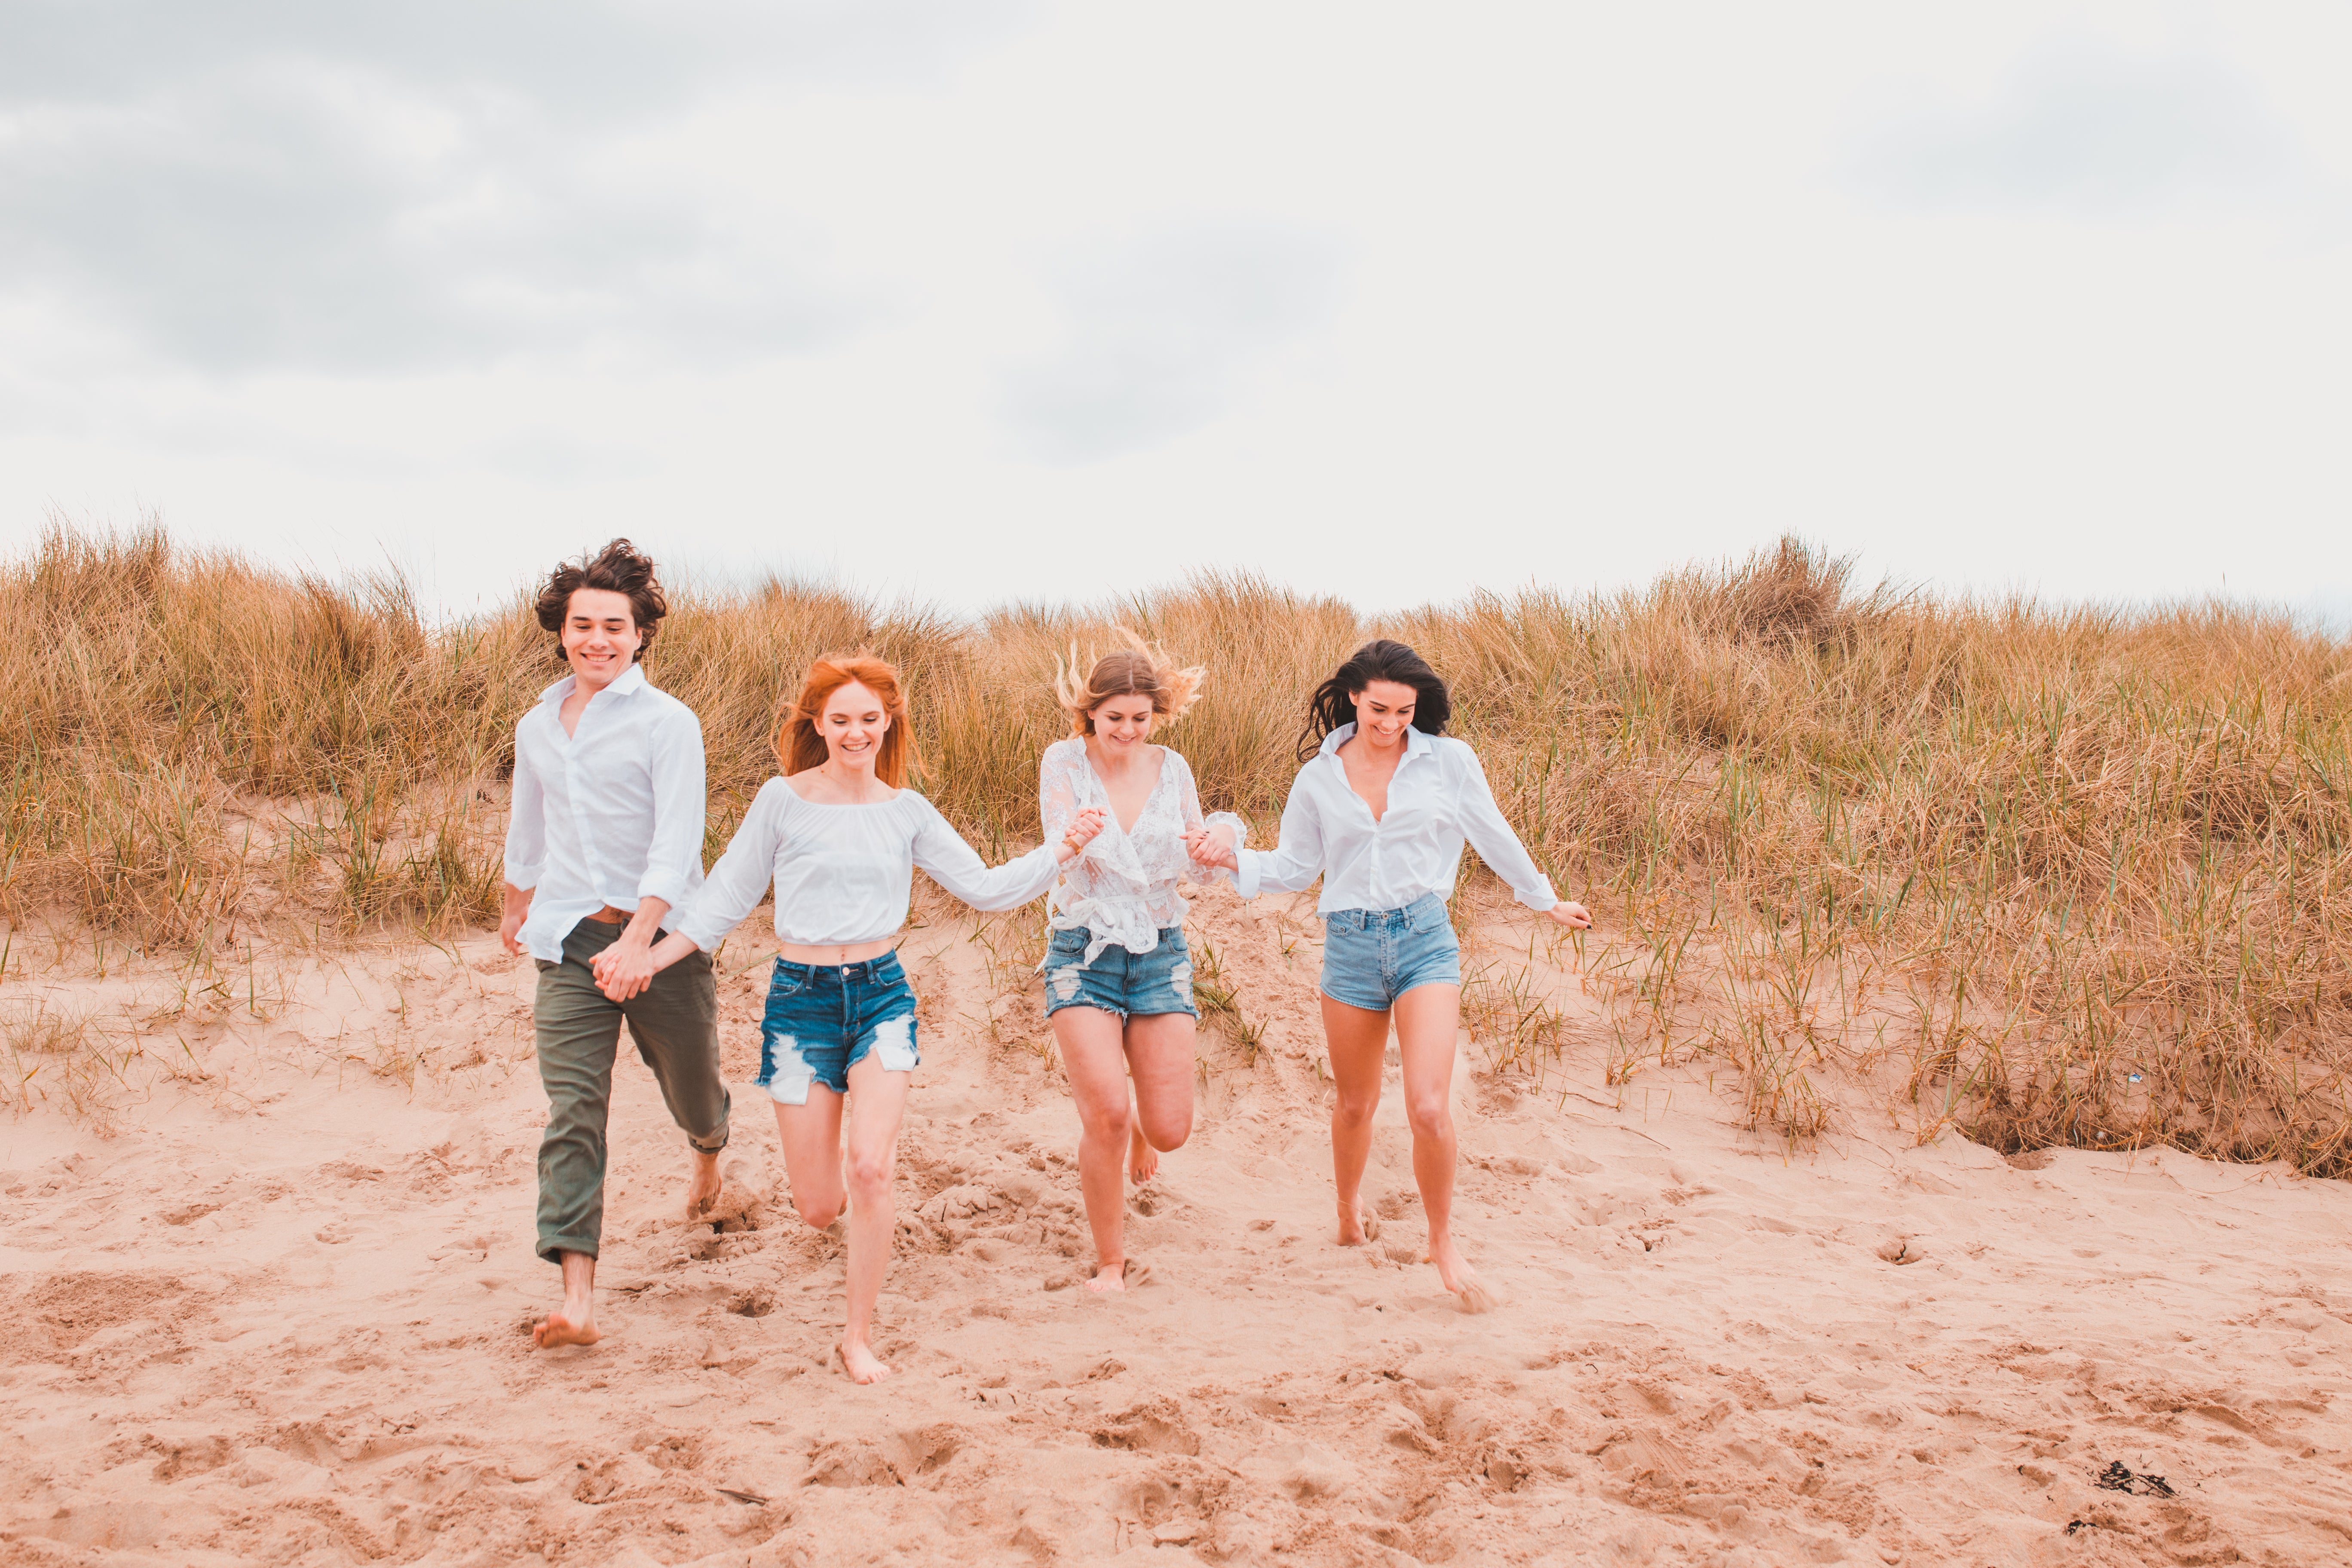 4 models, 3 girls and a boy, are running down a small sand dune towards the camera with their hair flowing in the wind. They are all looking towards the ground and are smiling. There is sand and dune grass in the background. 